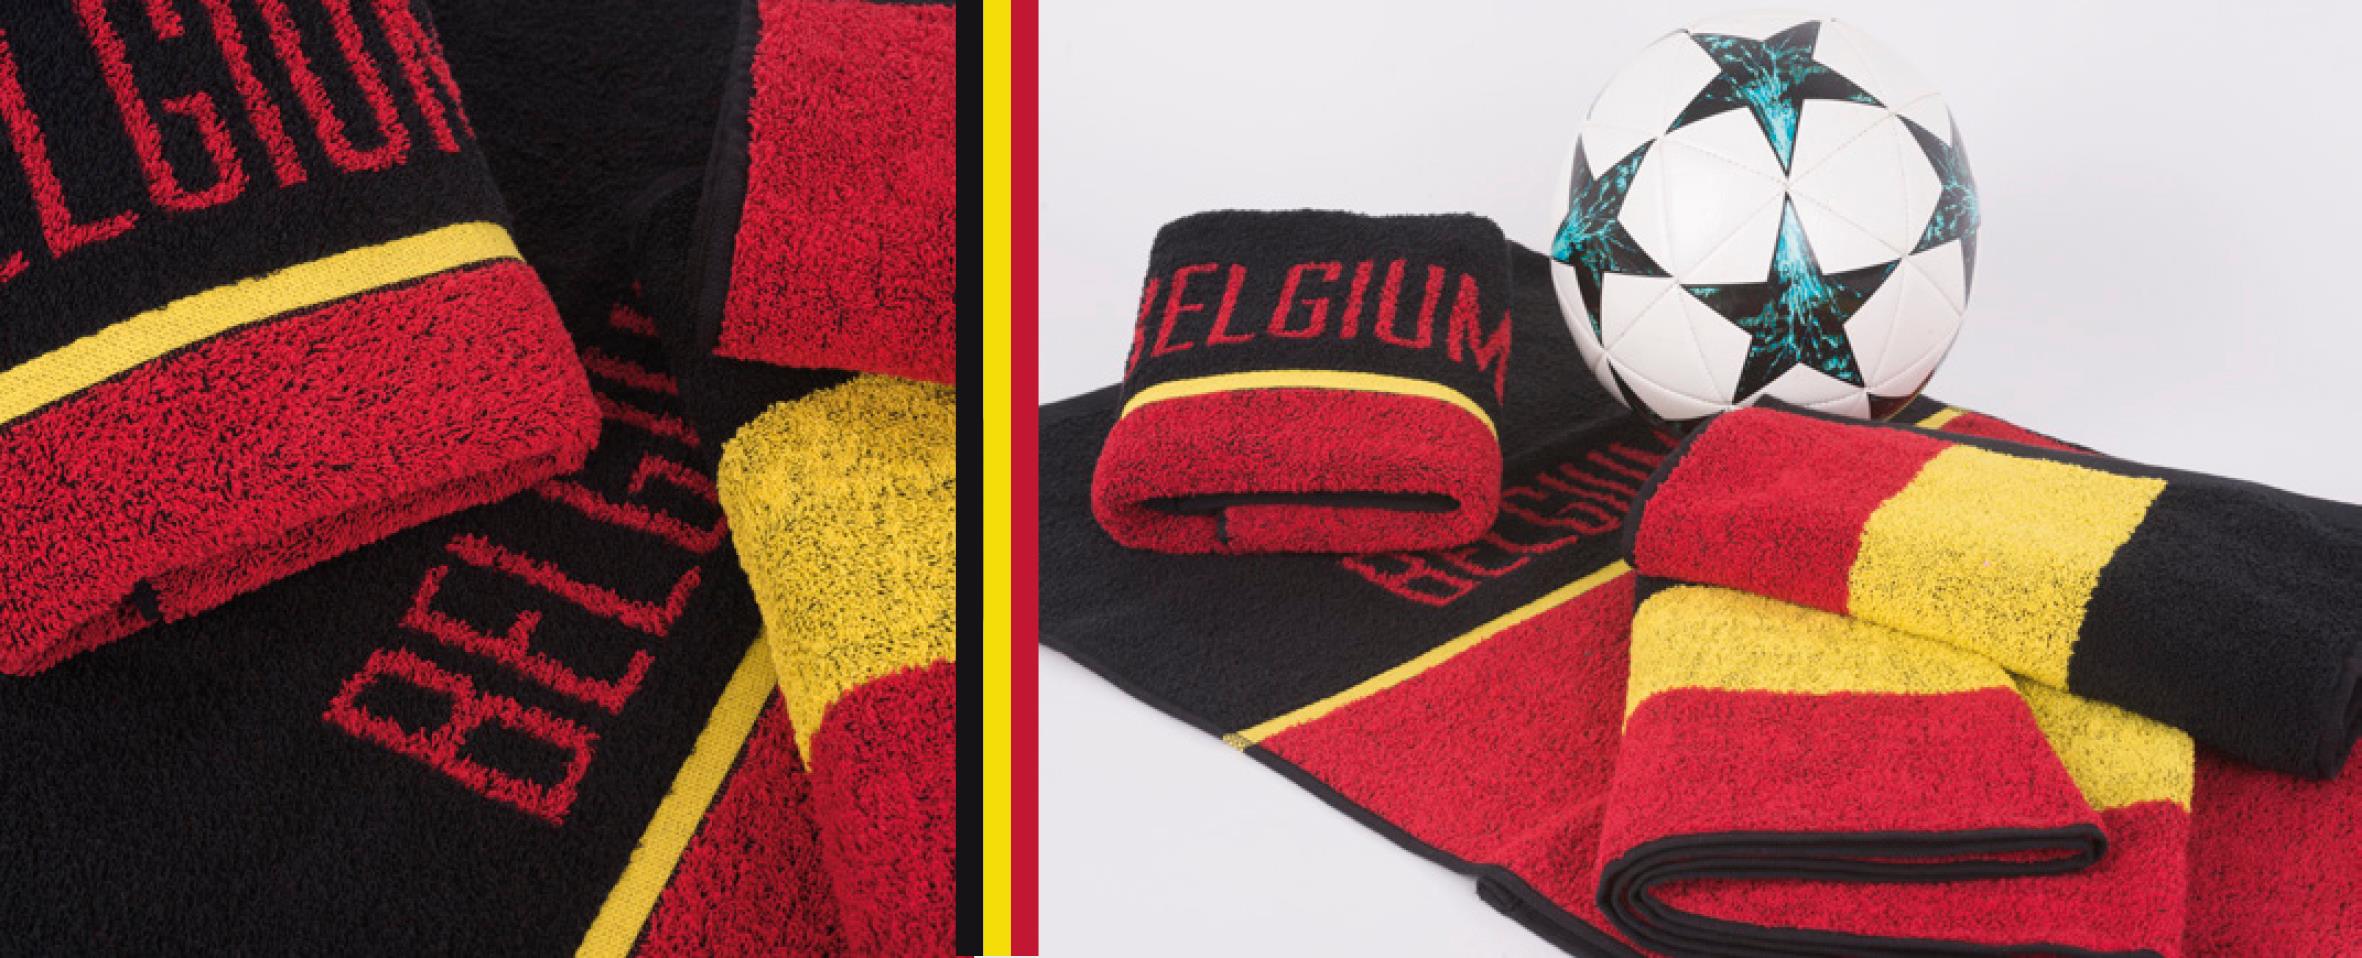 Belgian-themed towels by Clarysse